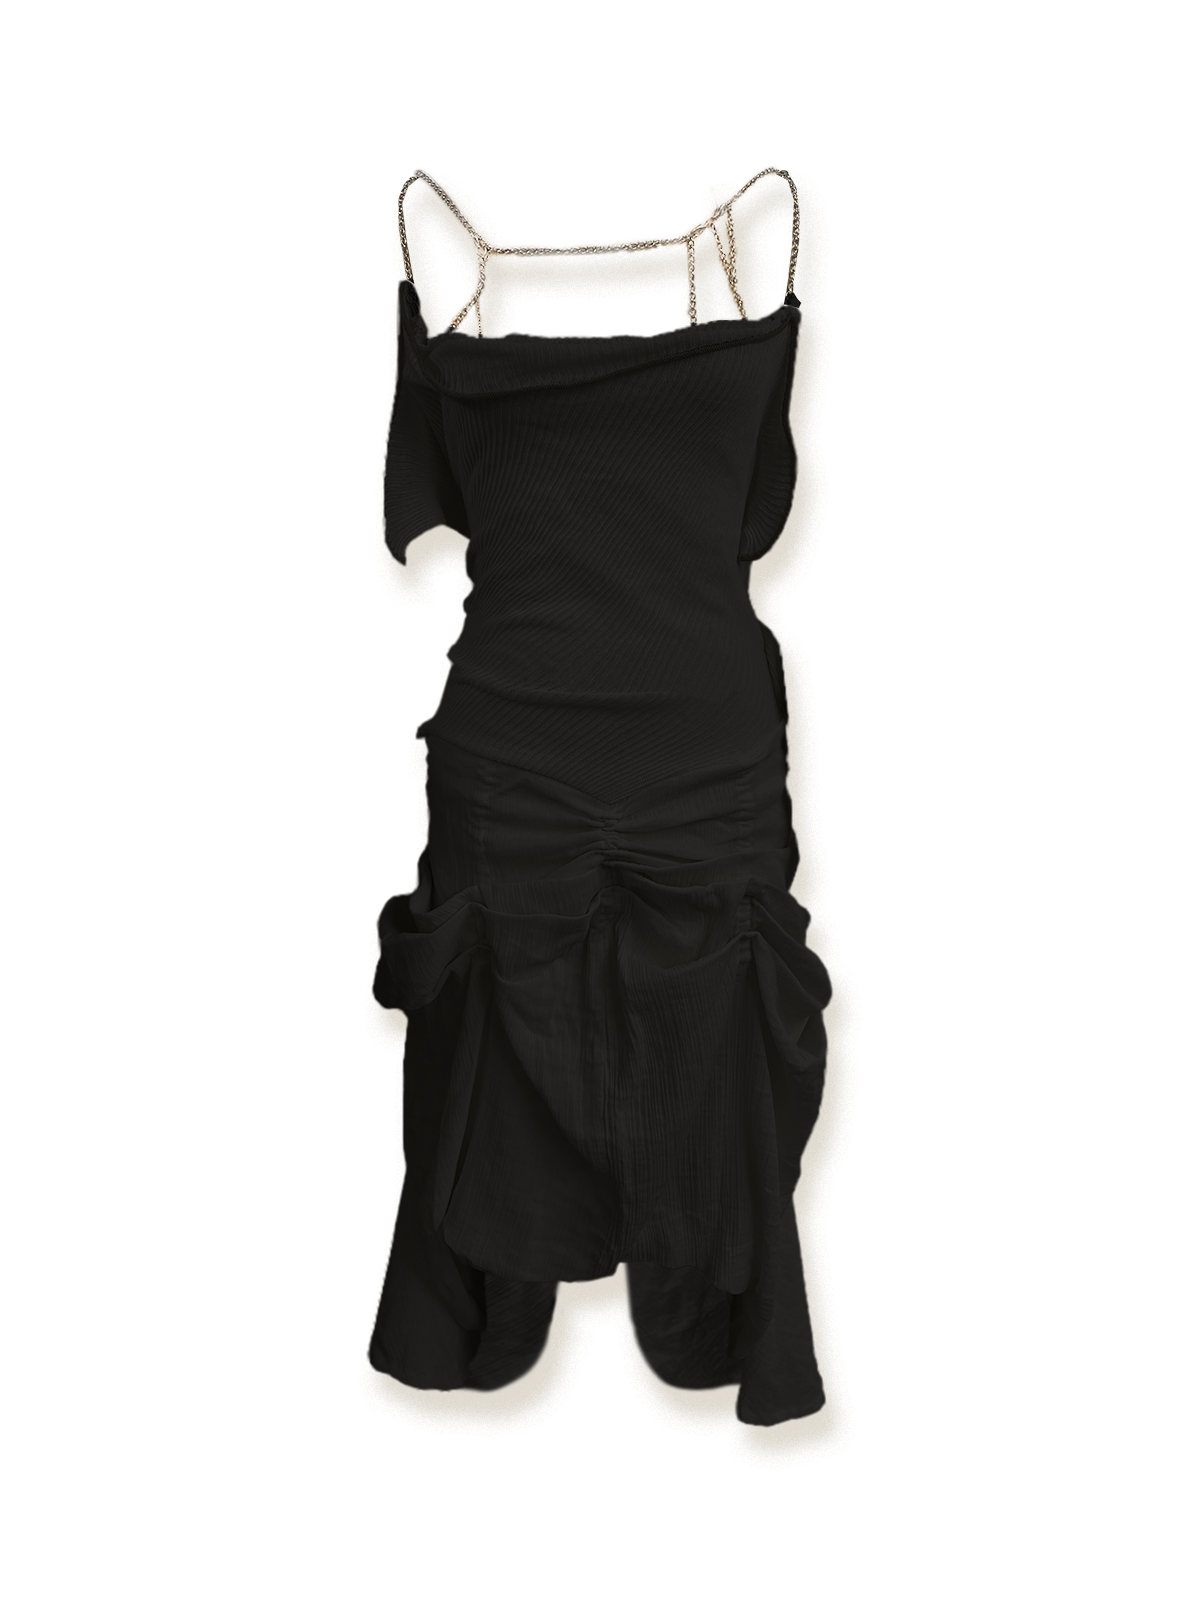 bound by chains sleeveless dress